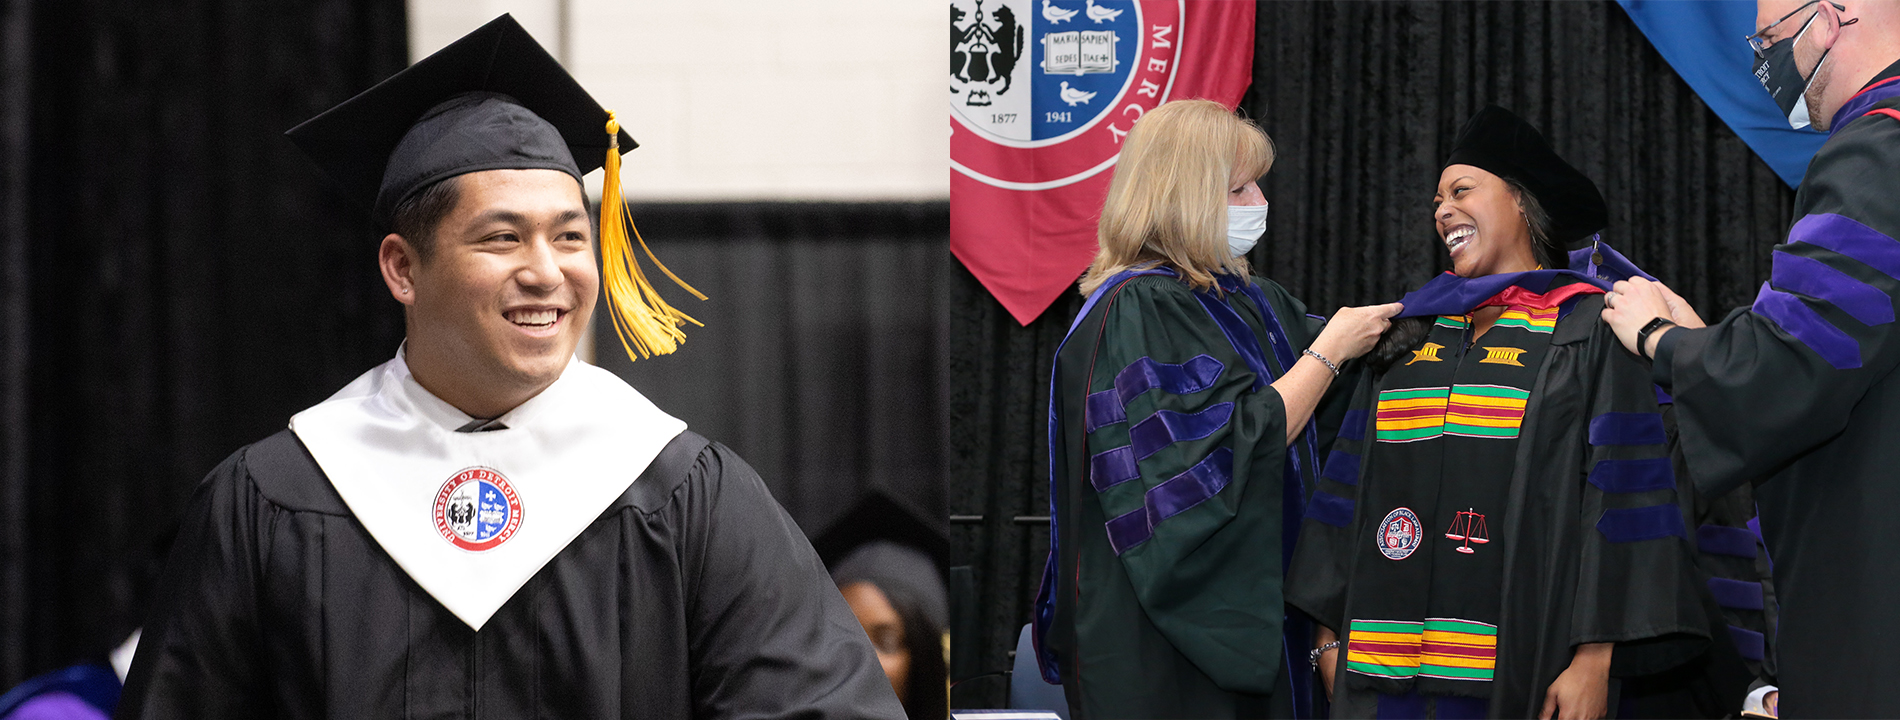 A graduate walks while wearing University of Detroit Mercy commencement regalia at left and three people take part in a Law ceremony on the right.